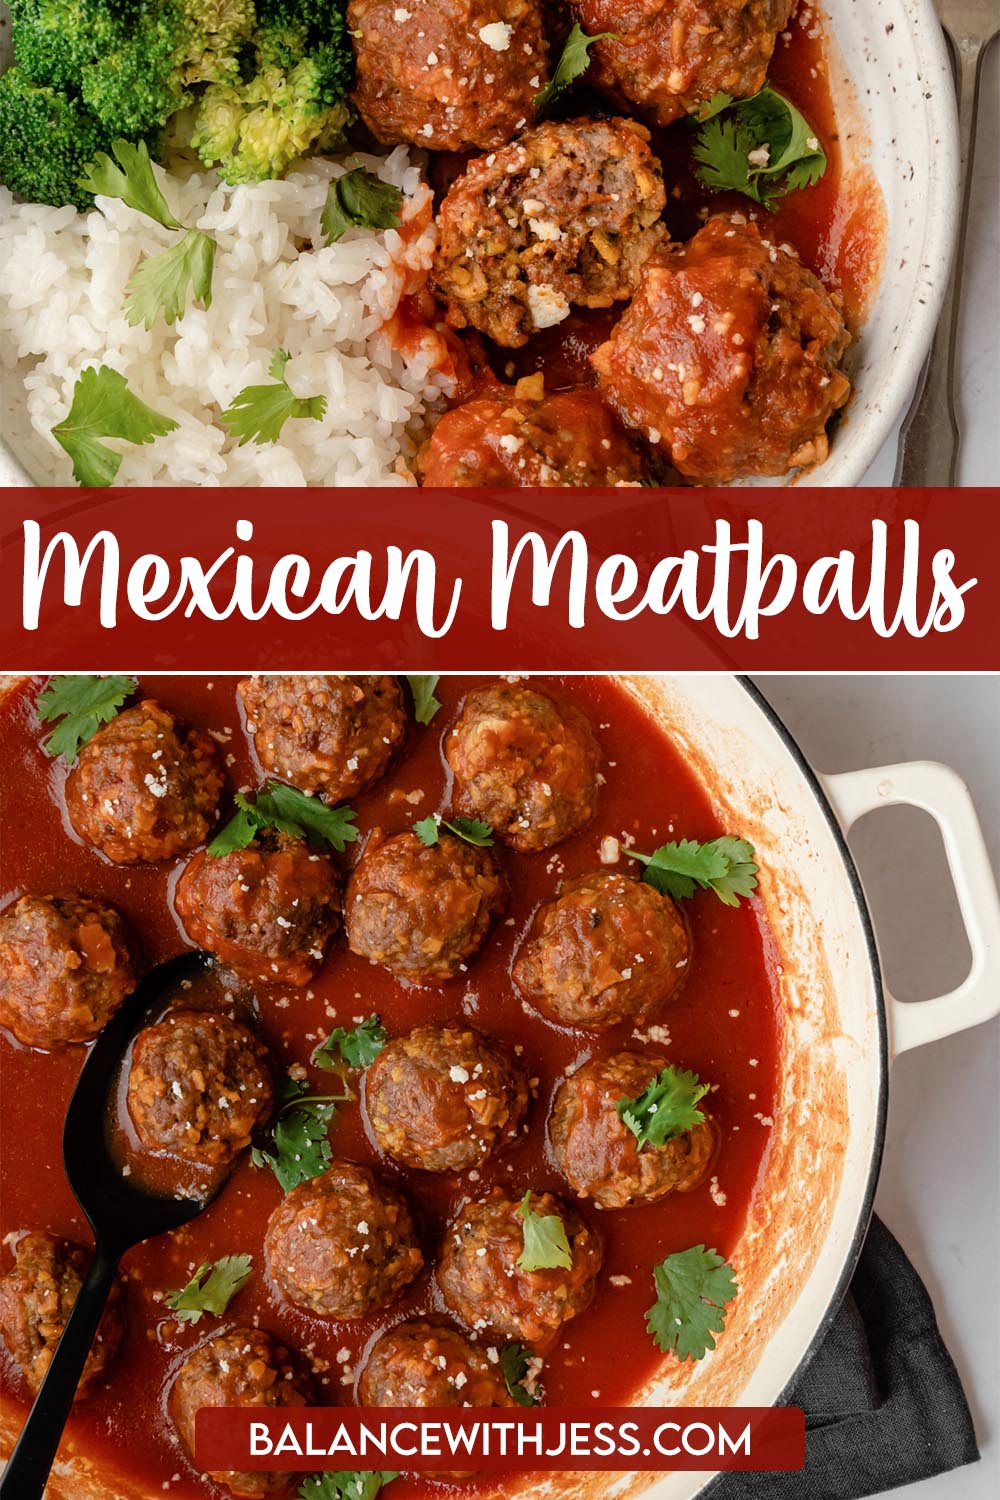 These gluten-free Mexican inspired Meatballs are tender, smoky, and super flavorful. They're served in a delicious adobo tomato sauce. They're the perfect snack, appetizer, or meal! Dairy free and vegan substitutions included.